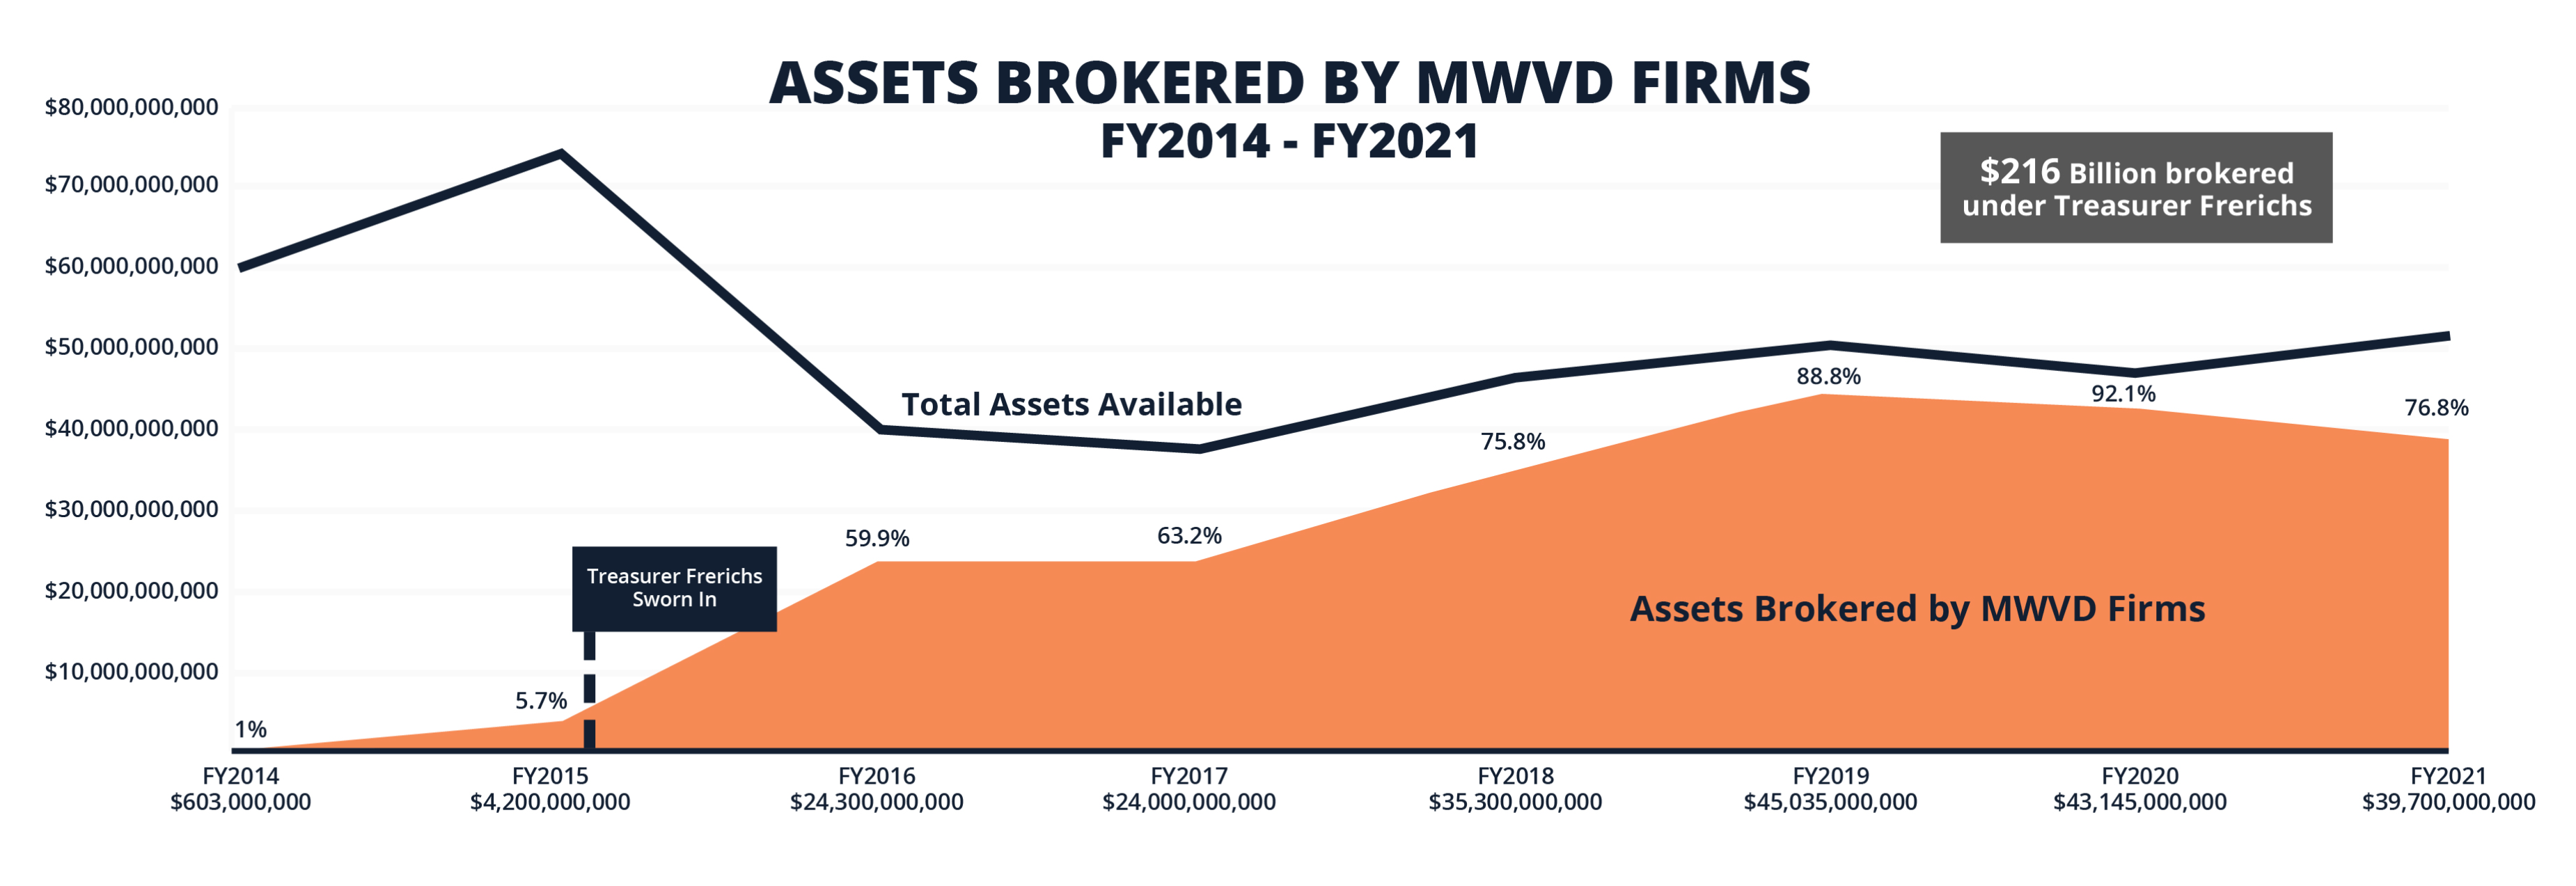 Assets Brokered by MWVD Firms